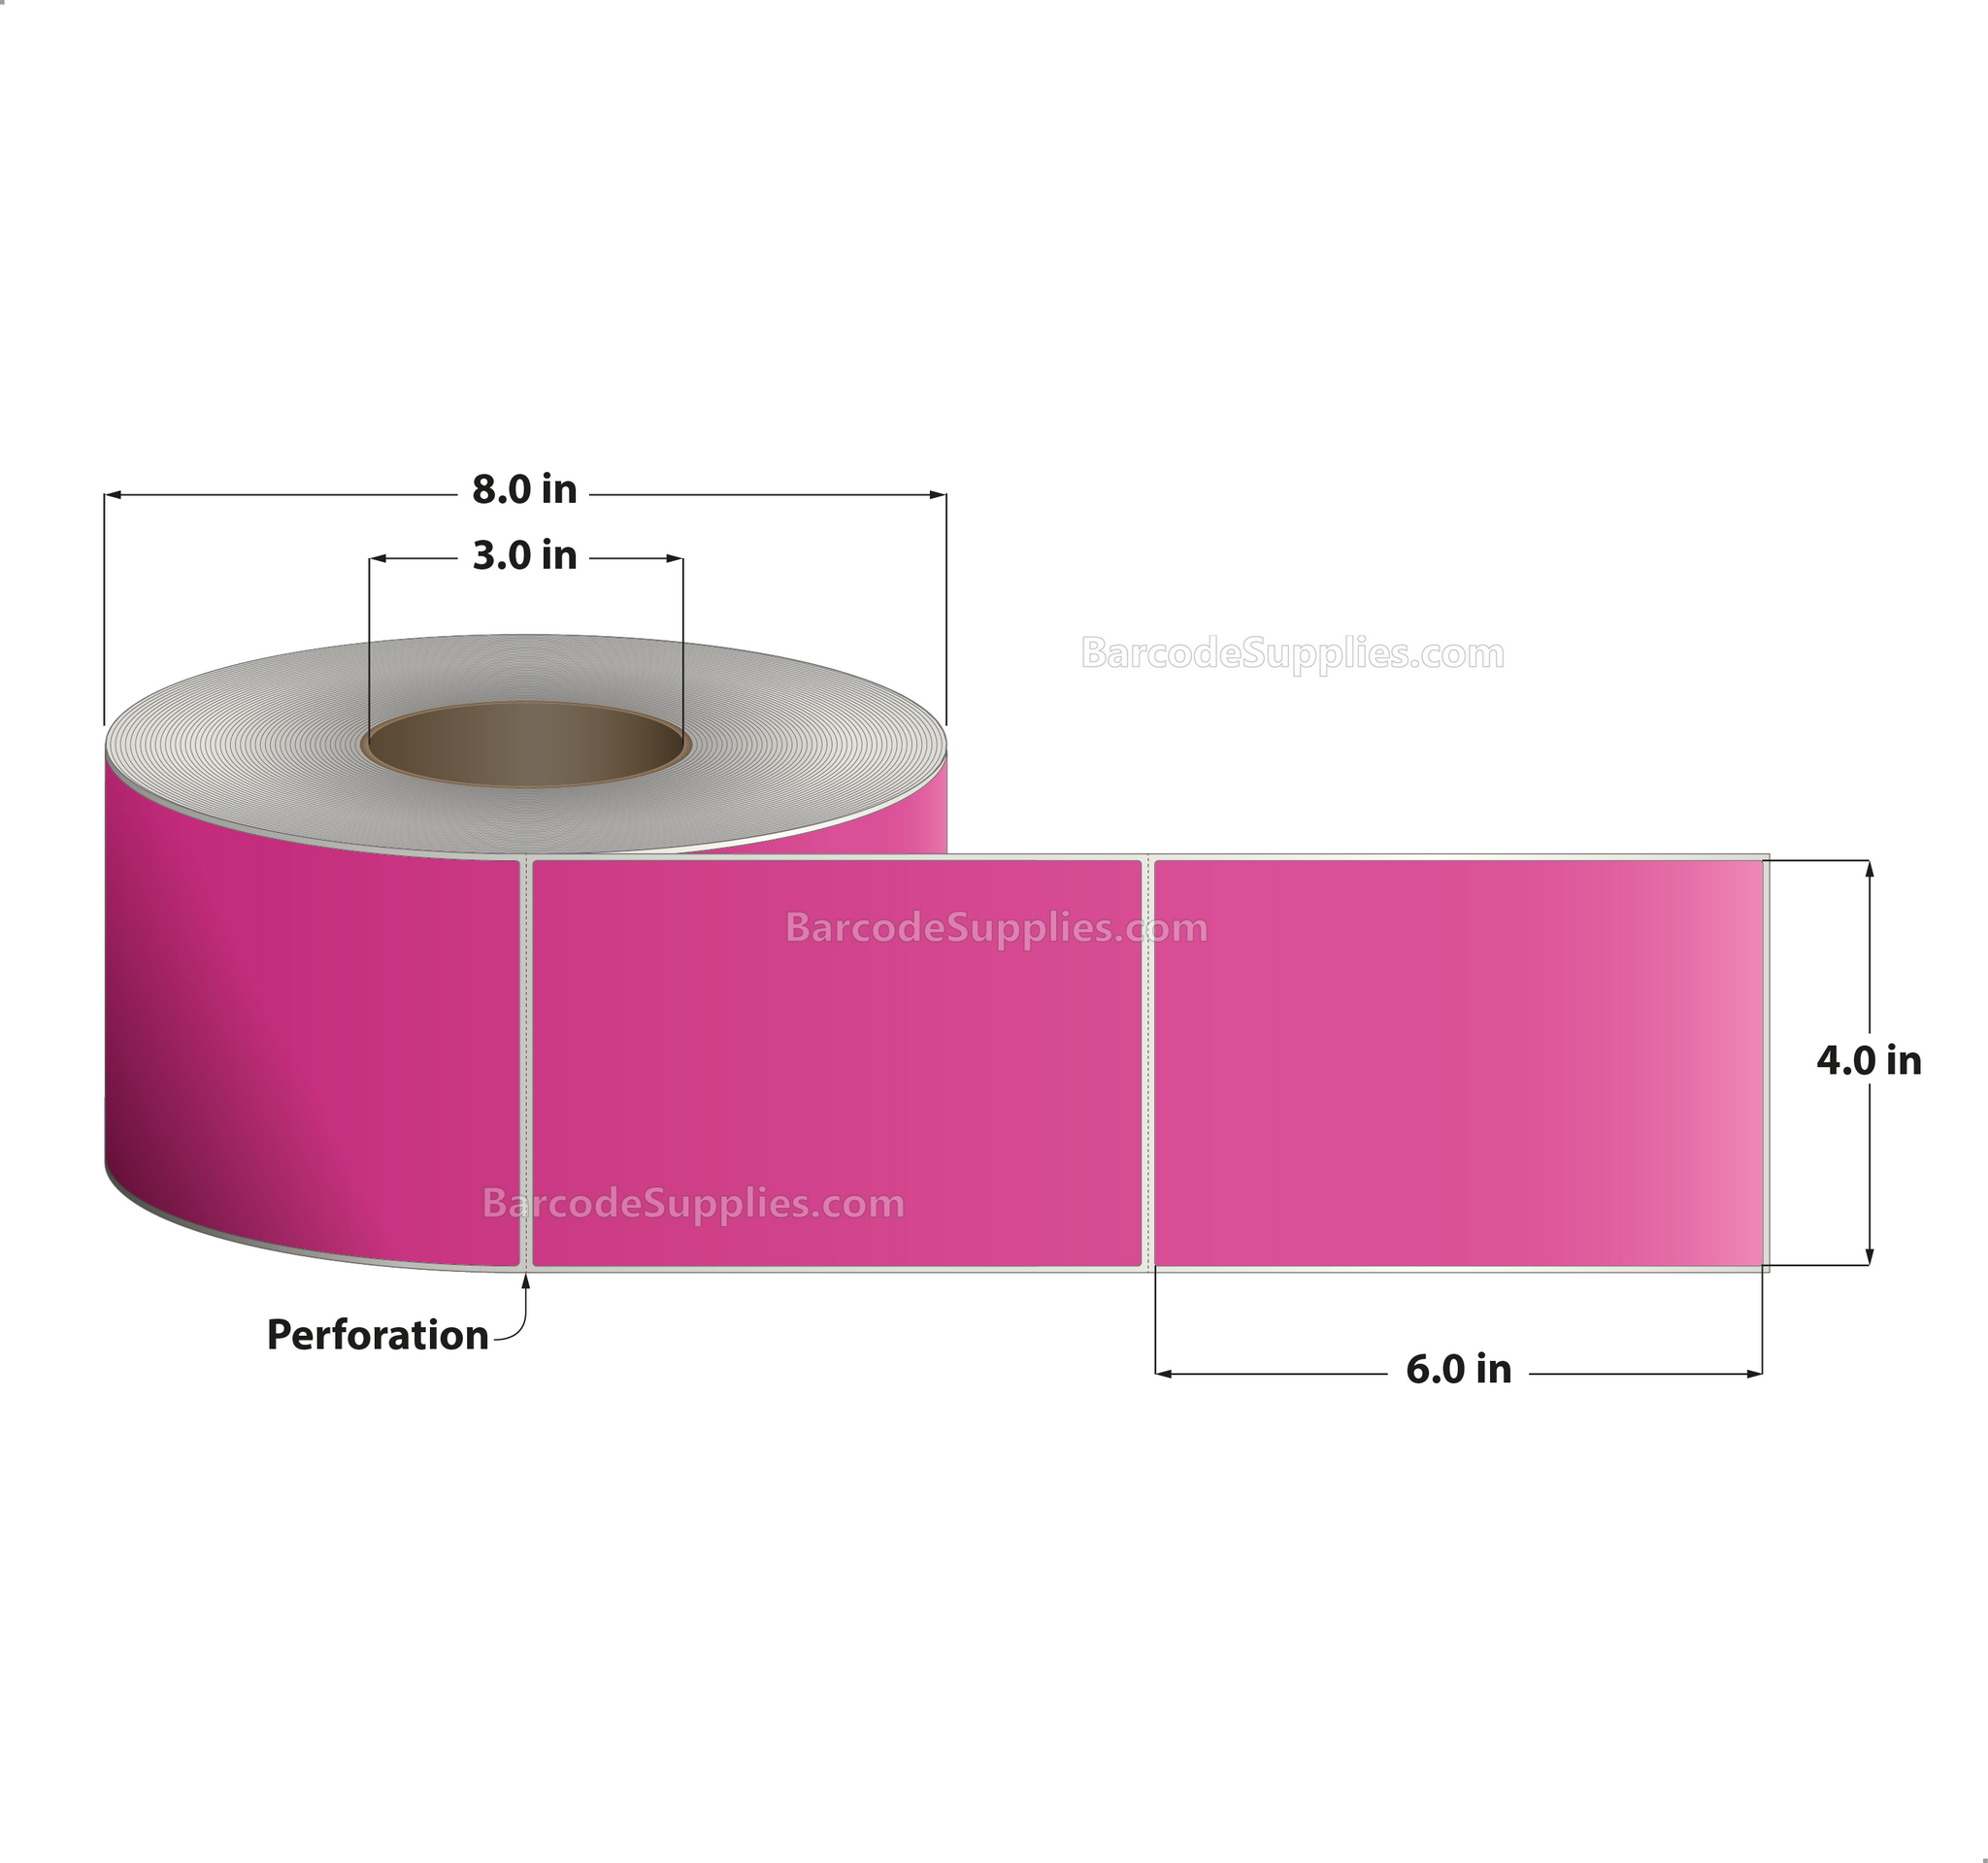 4 x 6 Thermal Transfer Fluorescent 806 Pink Labels With Permanent Adhesive - Perforated - 1000 Labels Per Roll - Carton Of 4 Rolls - 4000 Labels Total - MPN: FL-4-6-1000-PK